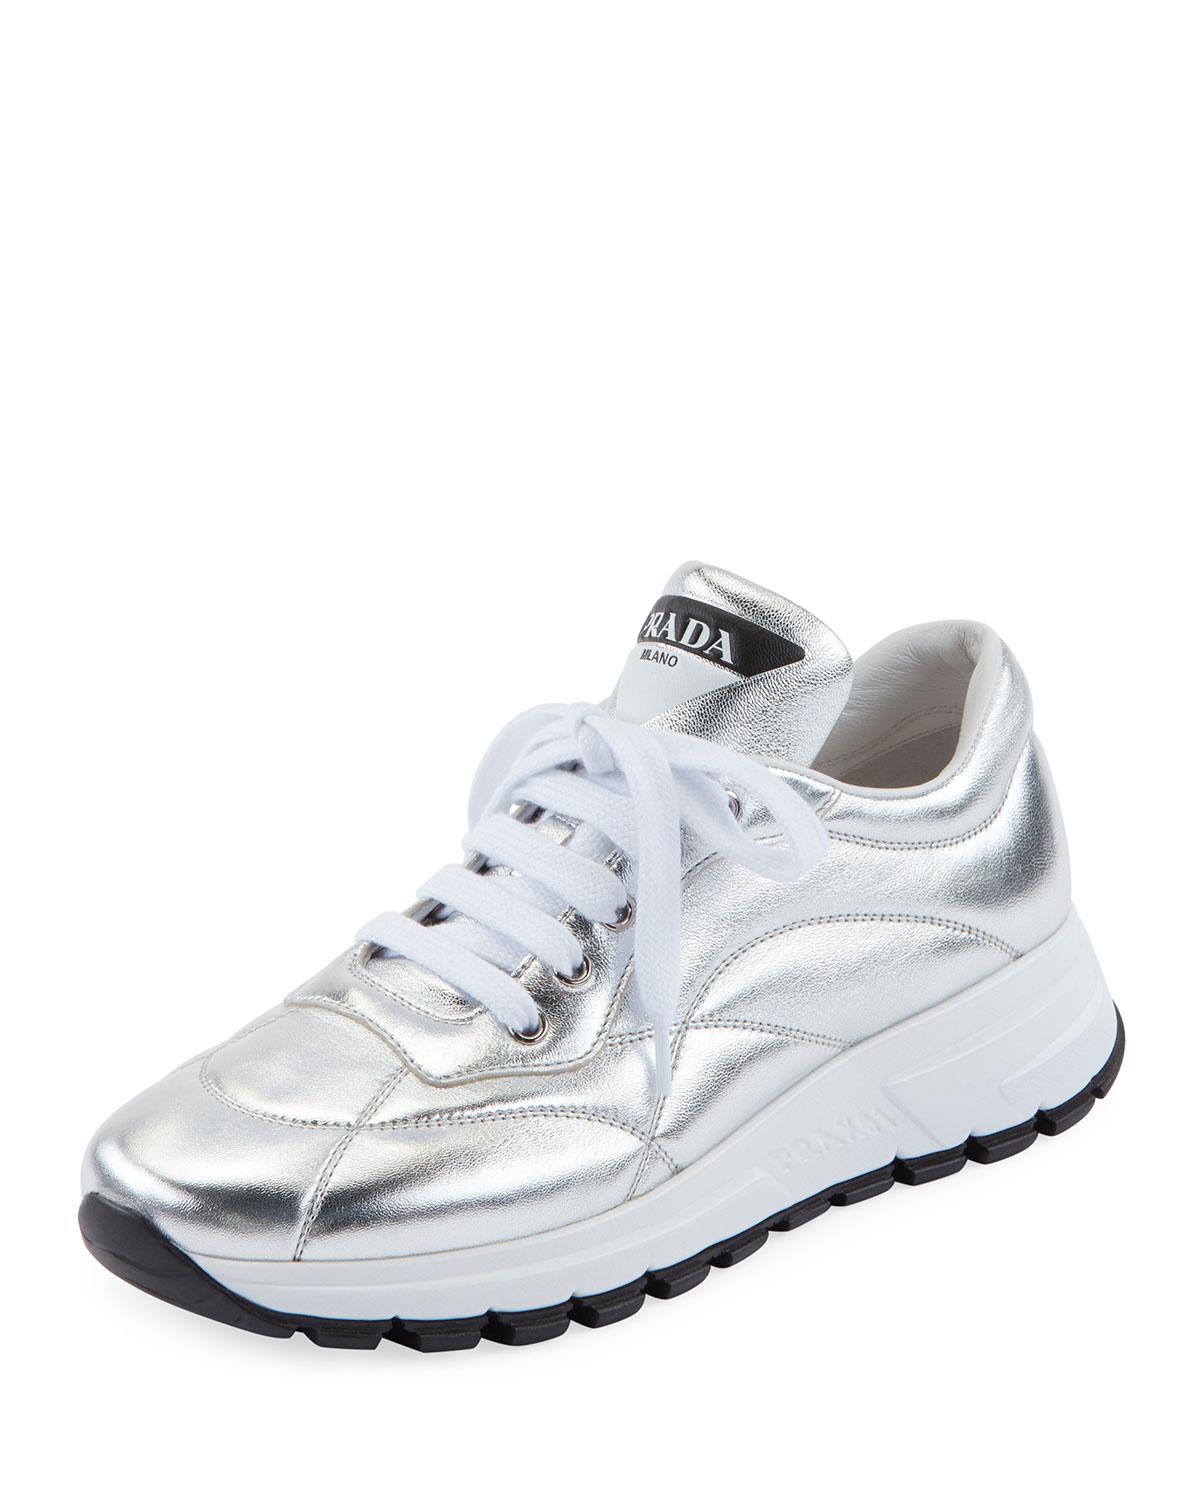 Prada Quilted Leather Trainer Sneakers in White - Lyst